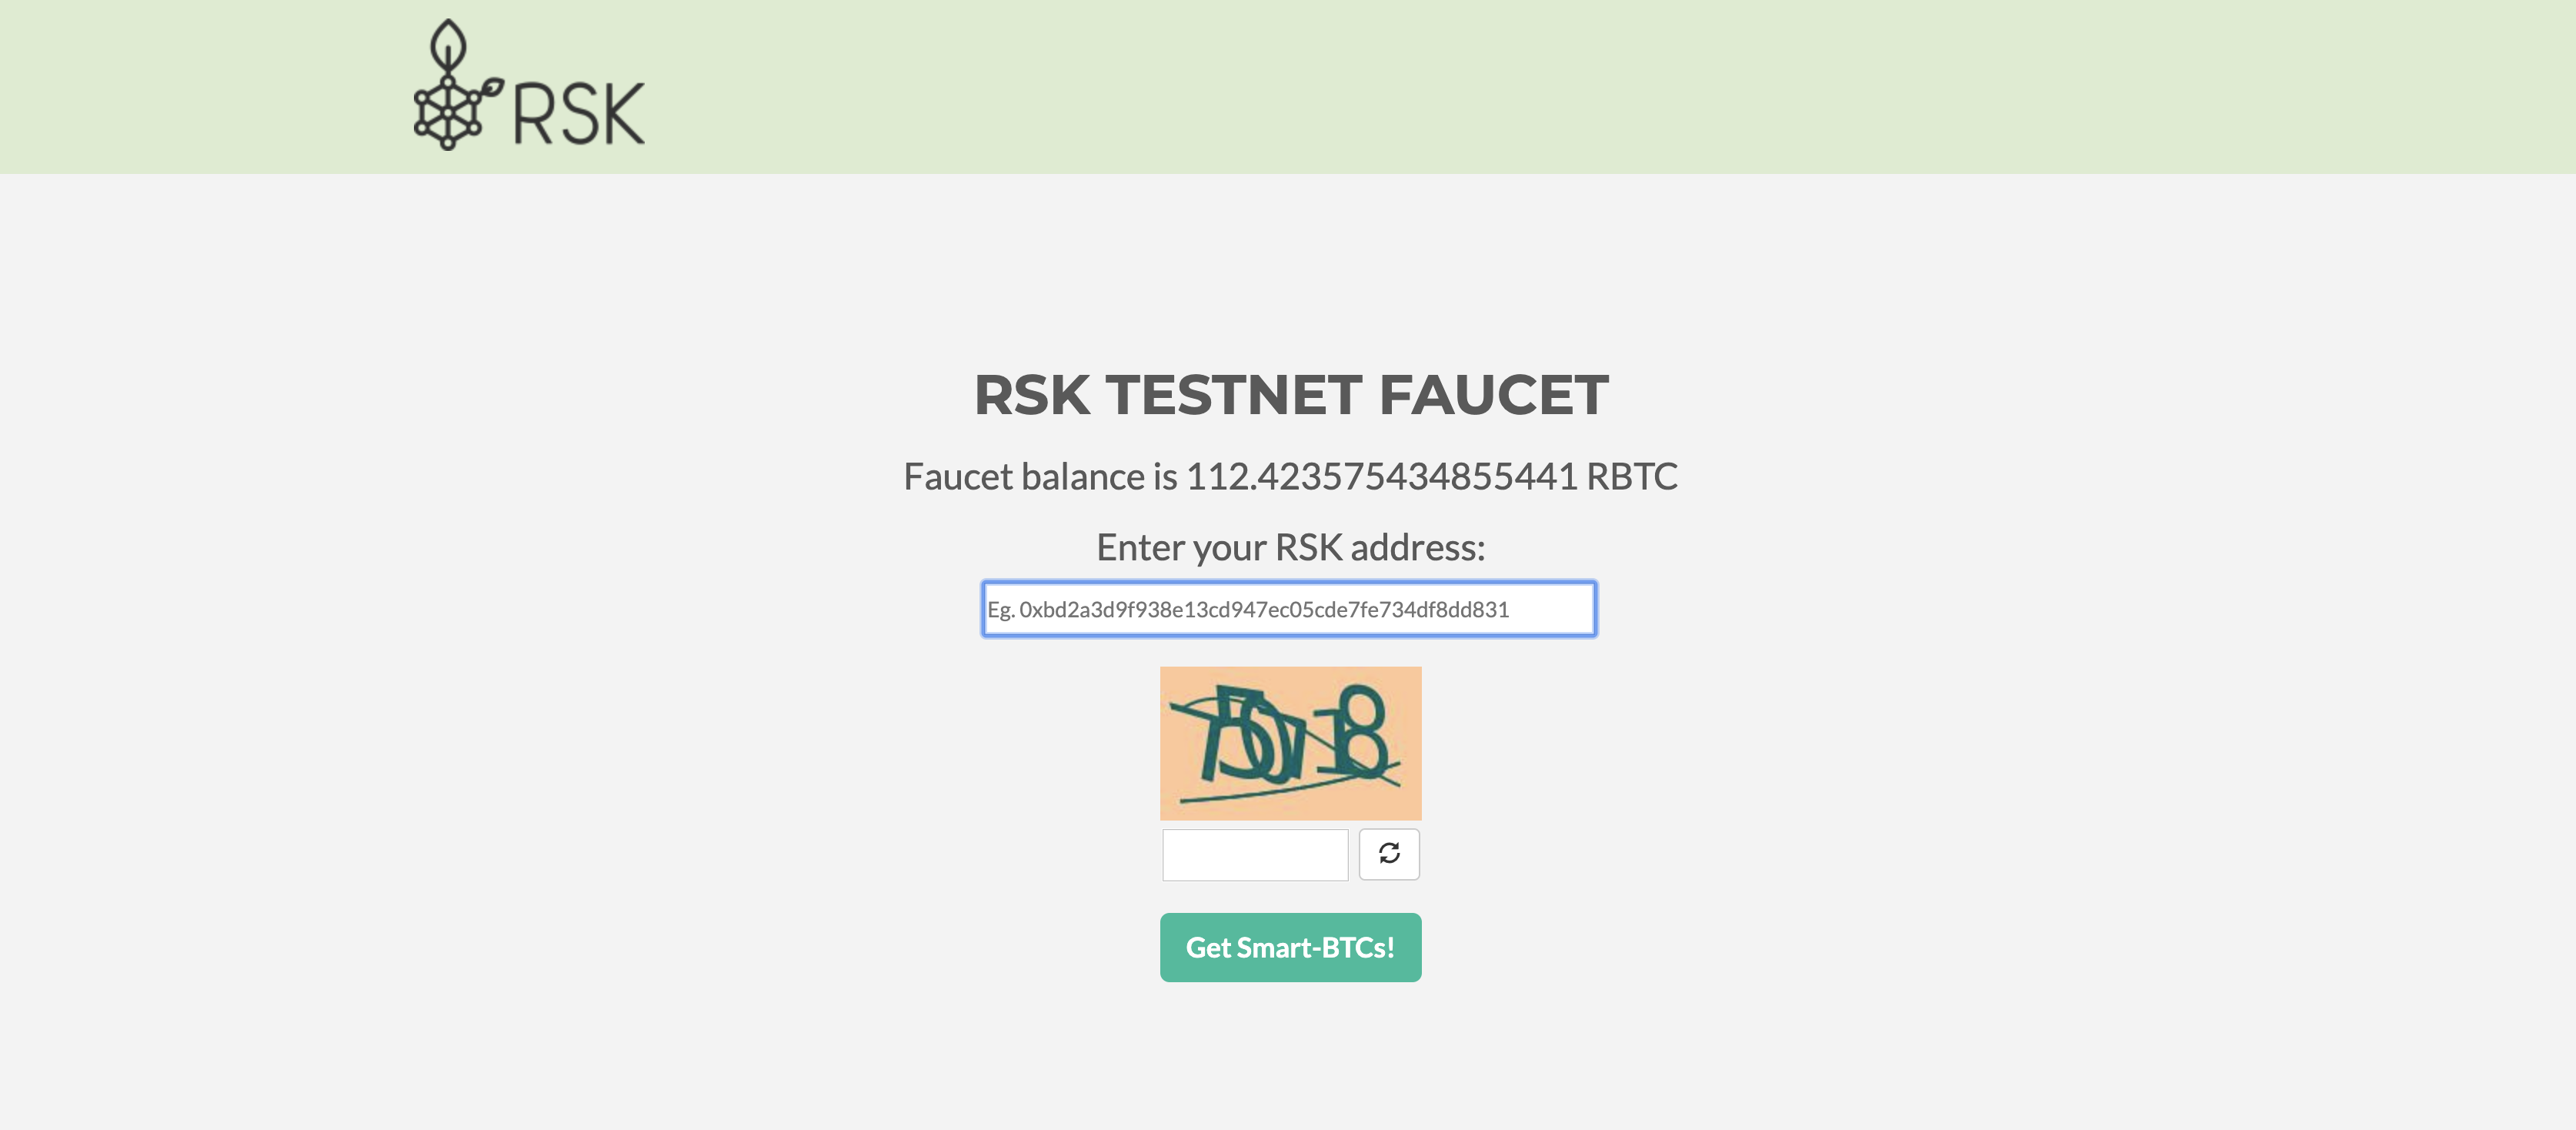 Let's go to RSK Faucet